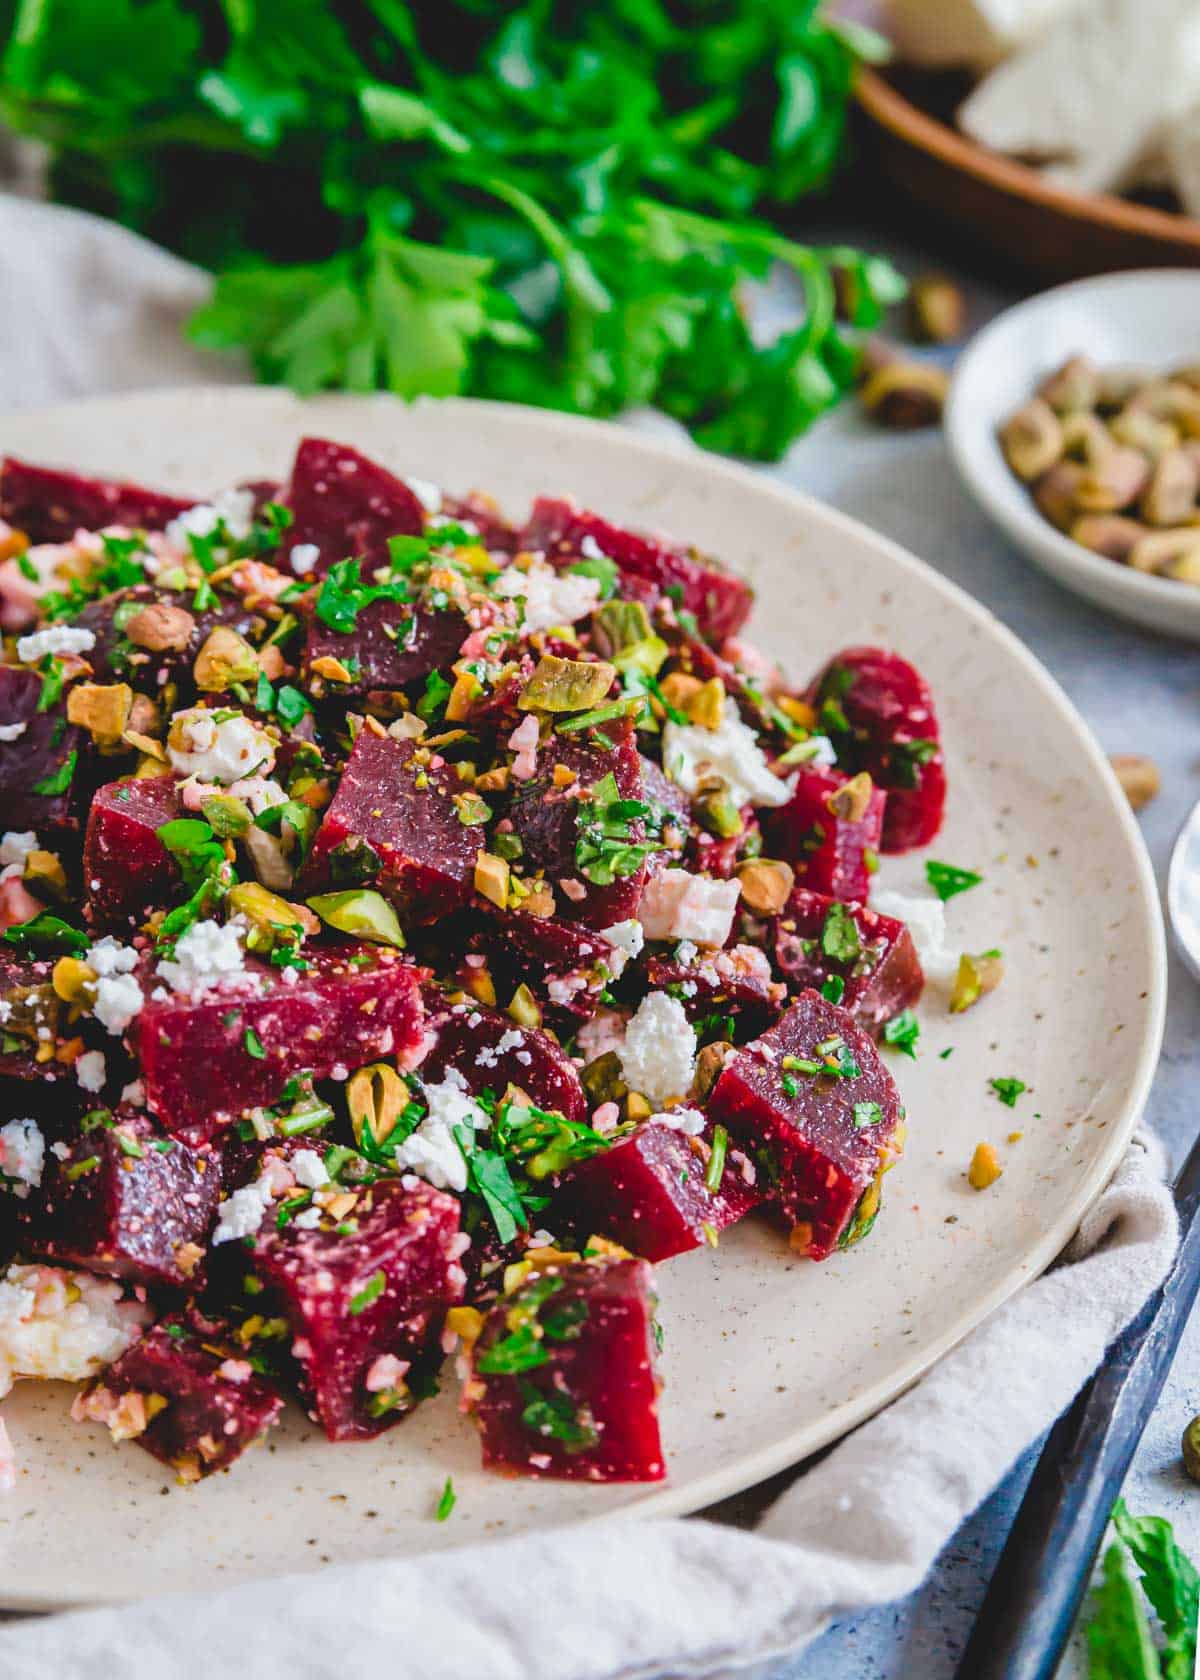 Beet with feta salad served with pistachios and fresh herbs.